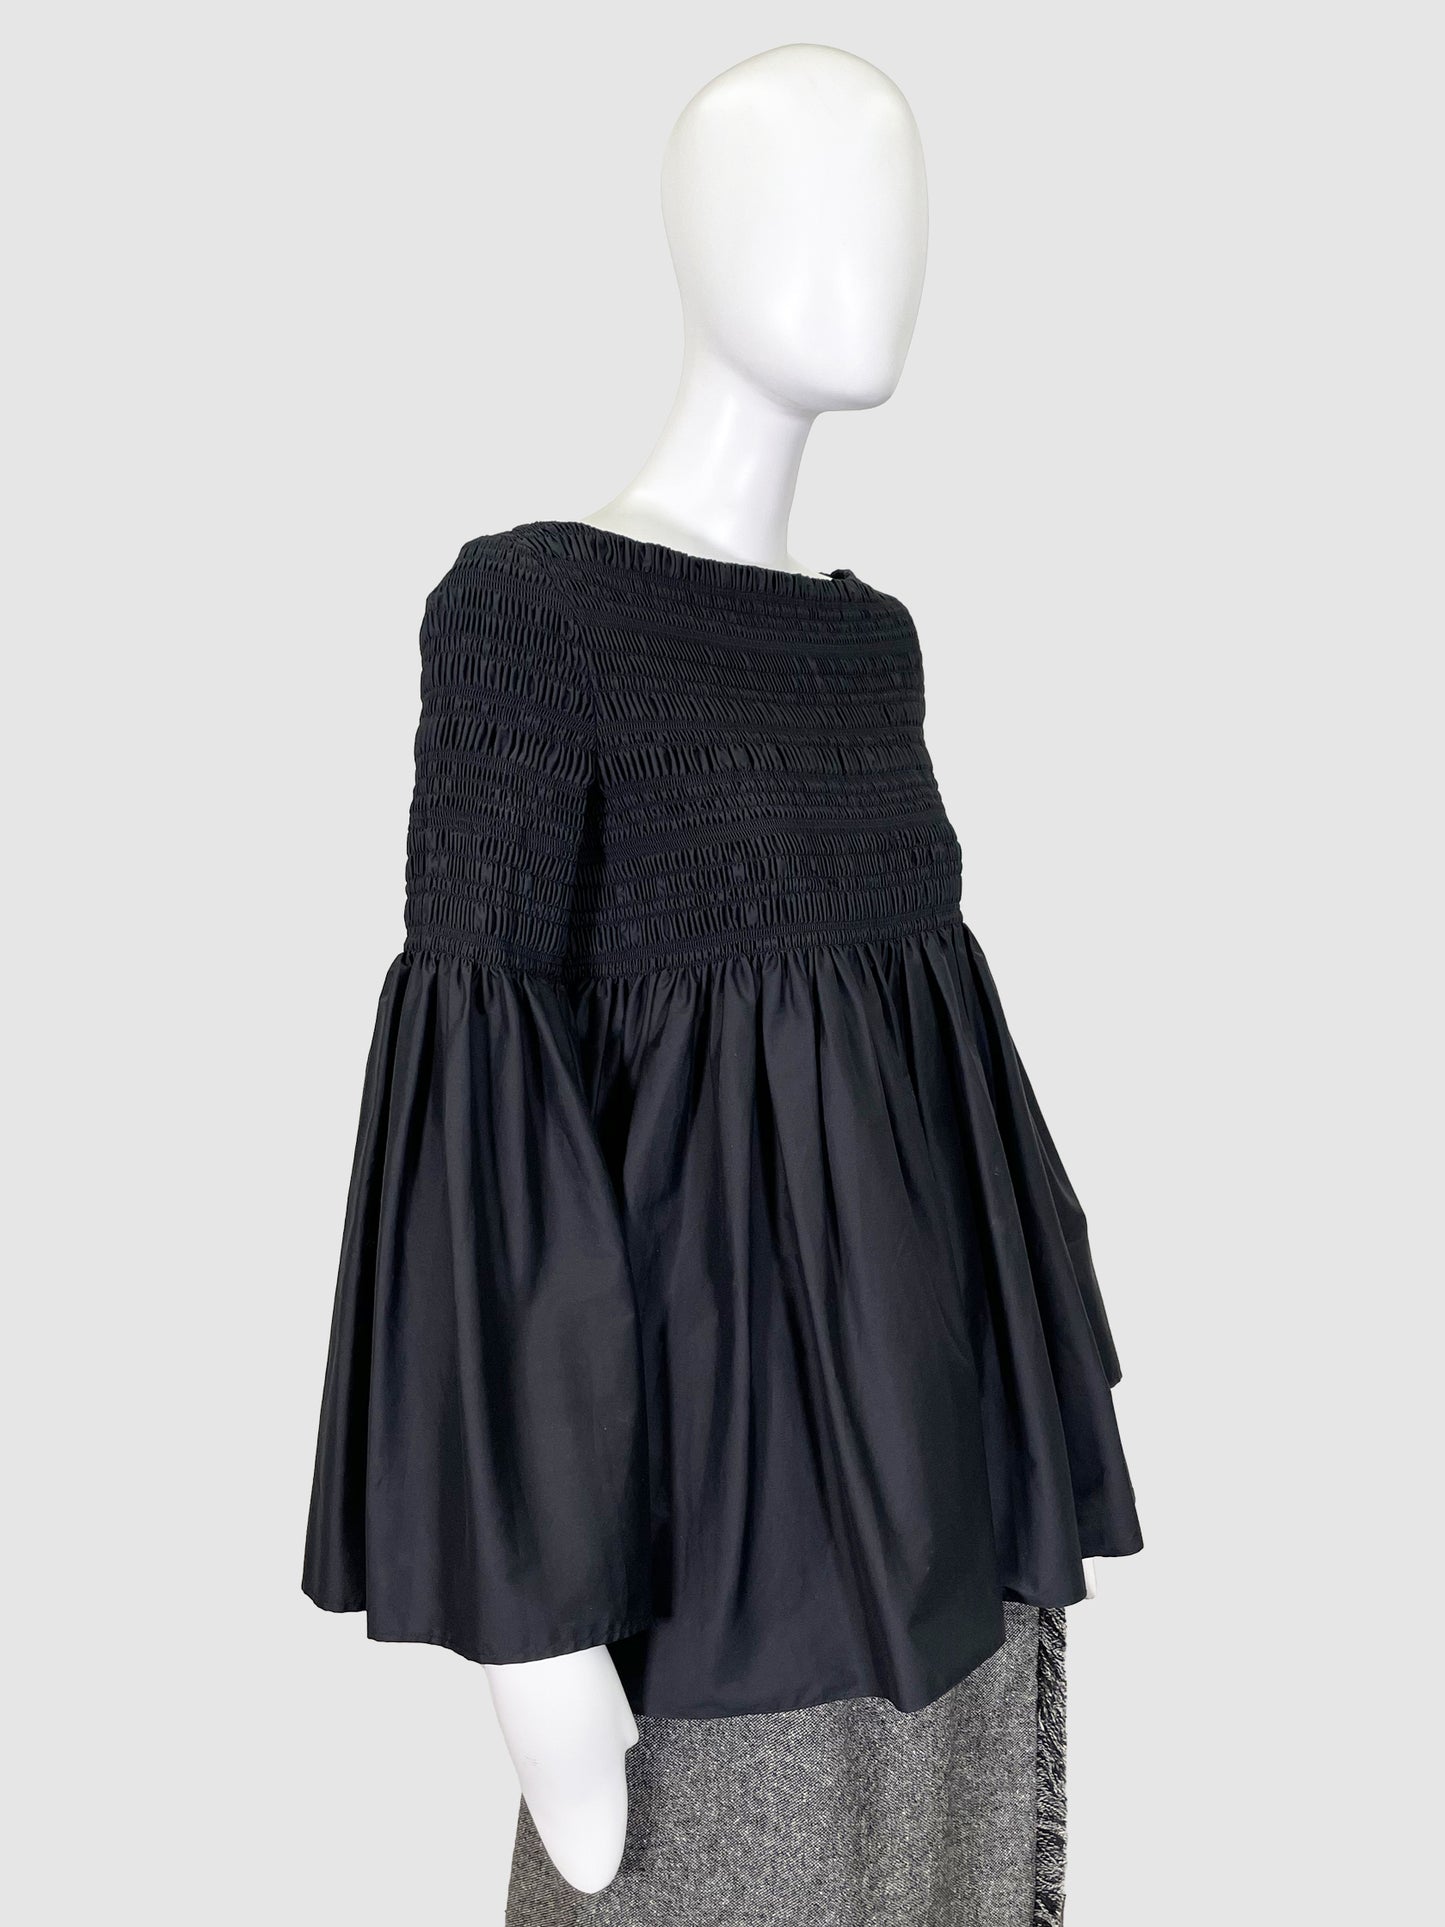 The Row Black Crinkled Top - Size S